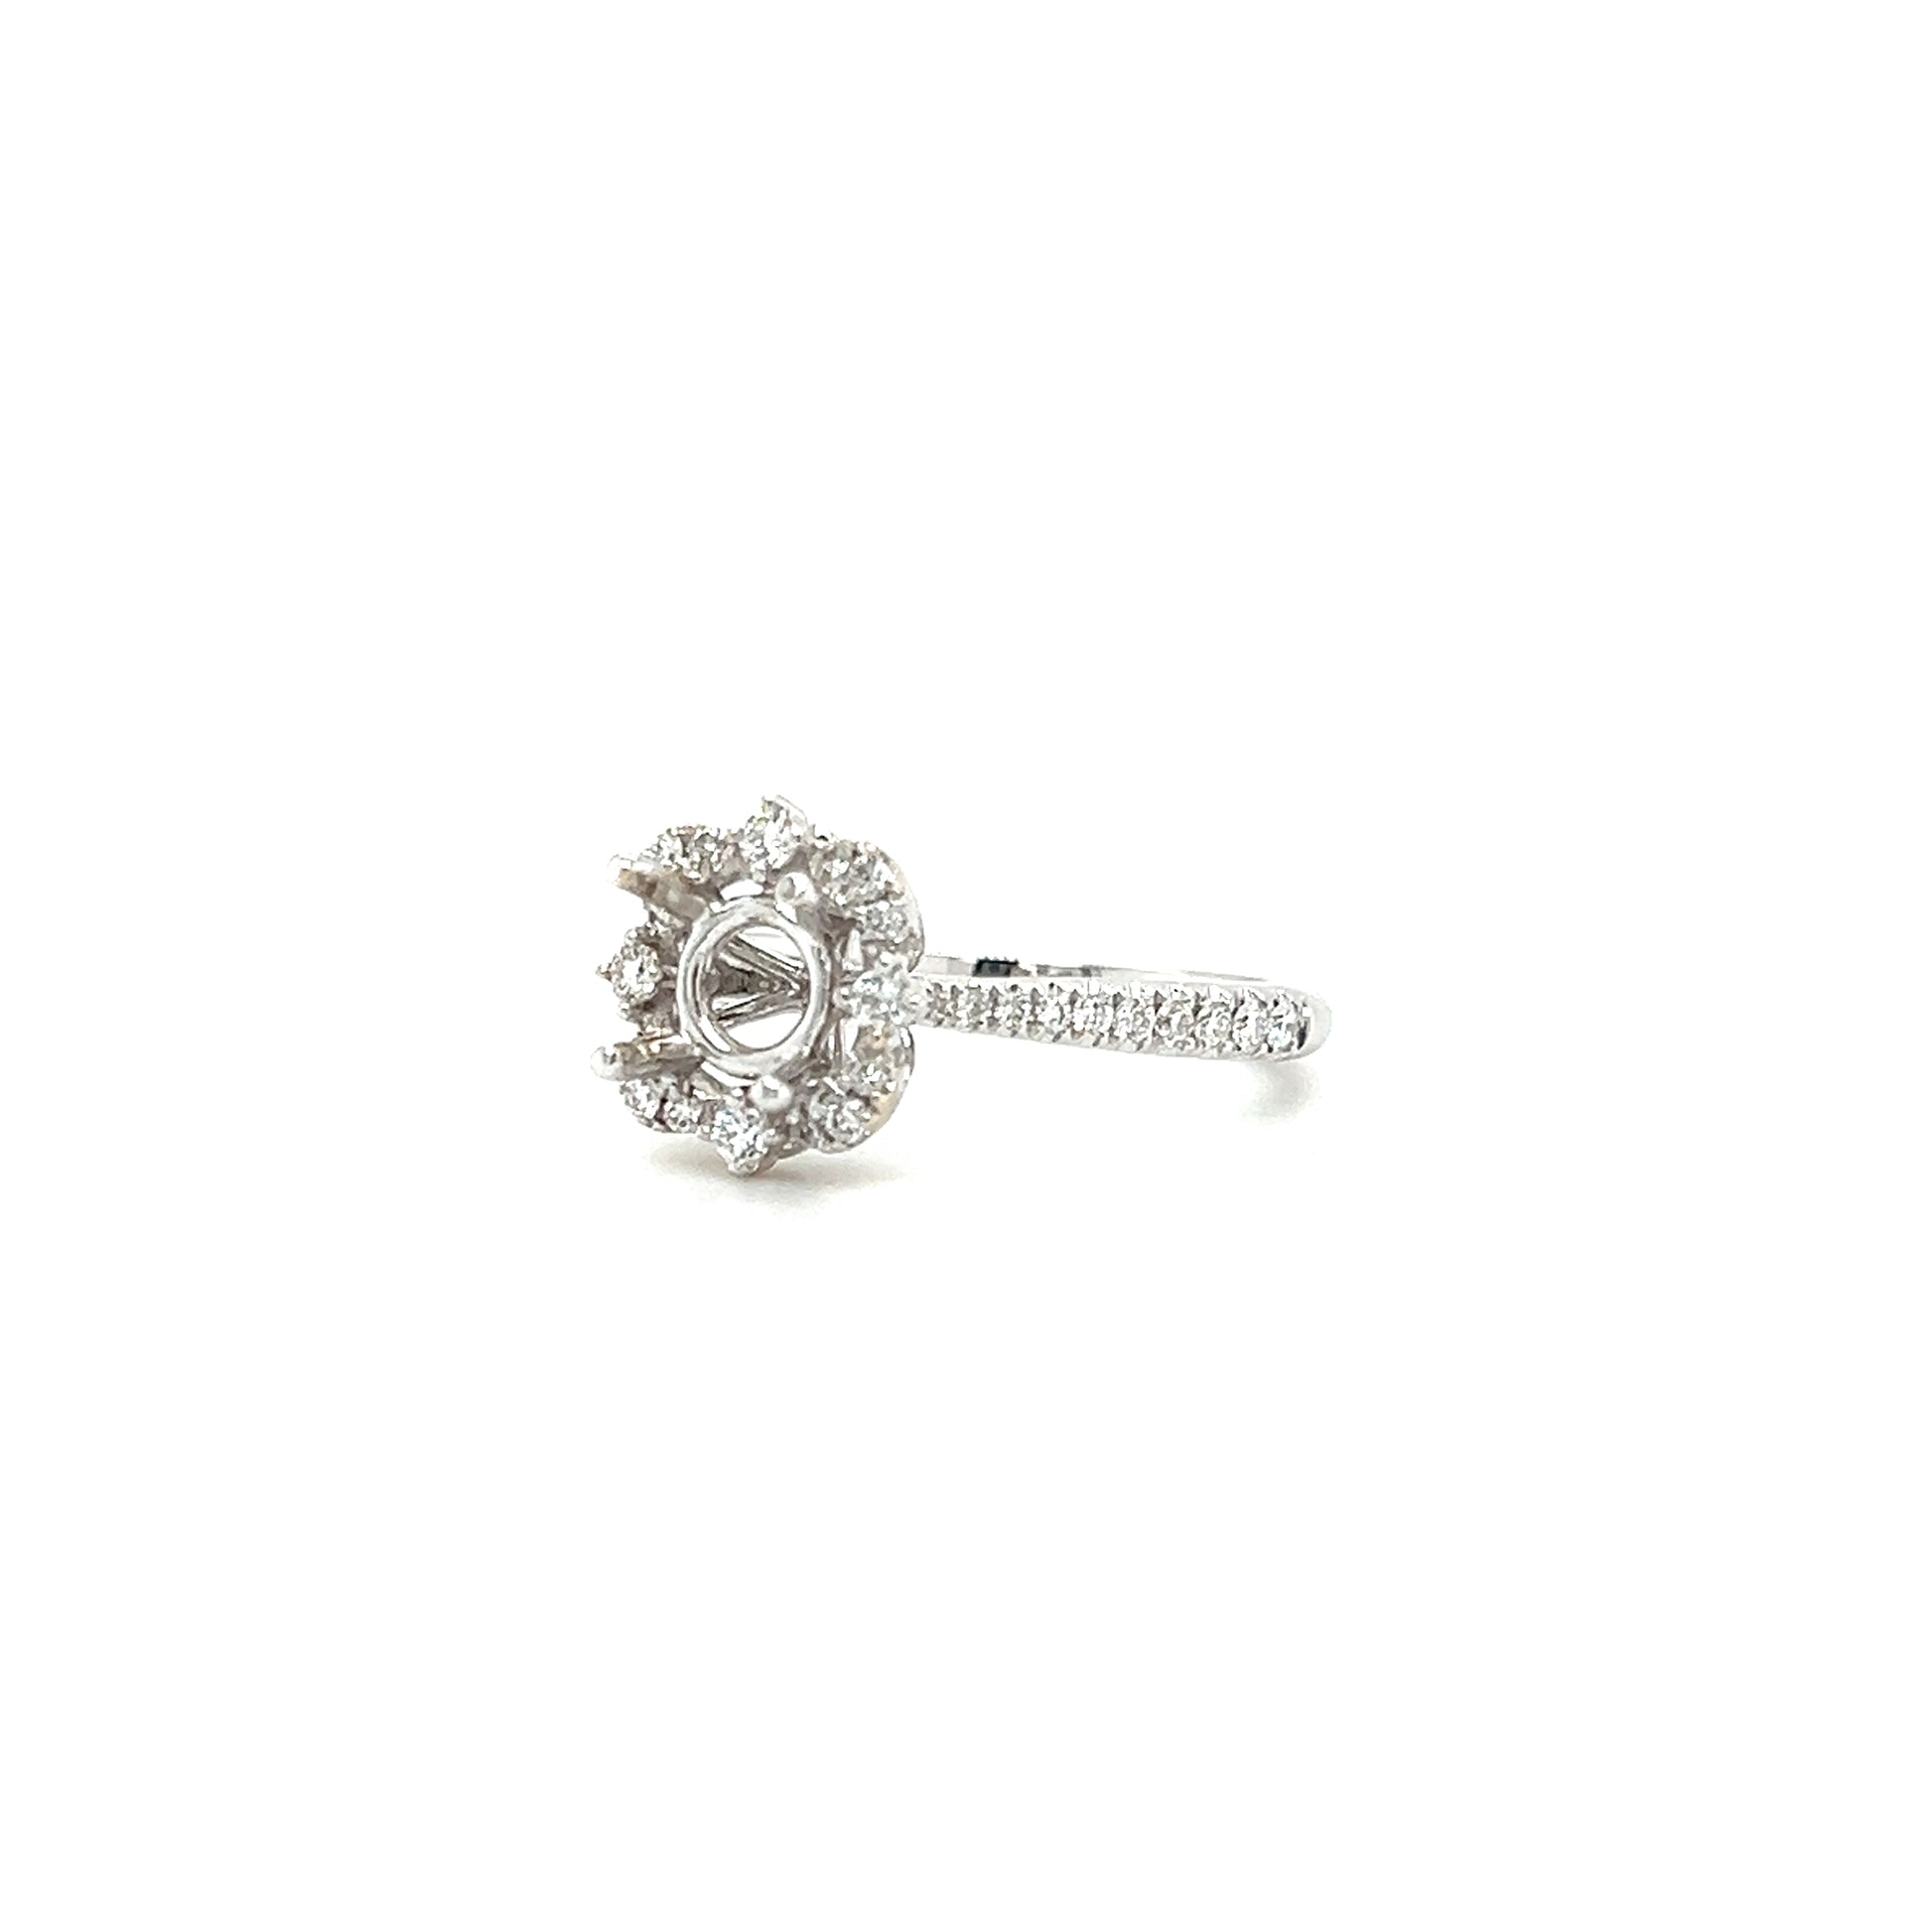 Floral Halo Ring Setting with 0.35ctw of Diamonds in 18K White Gold Right Side View